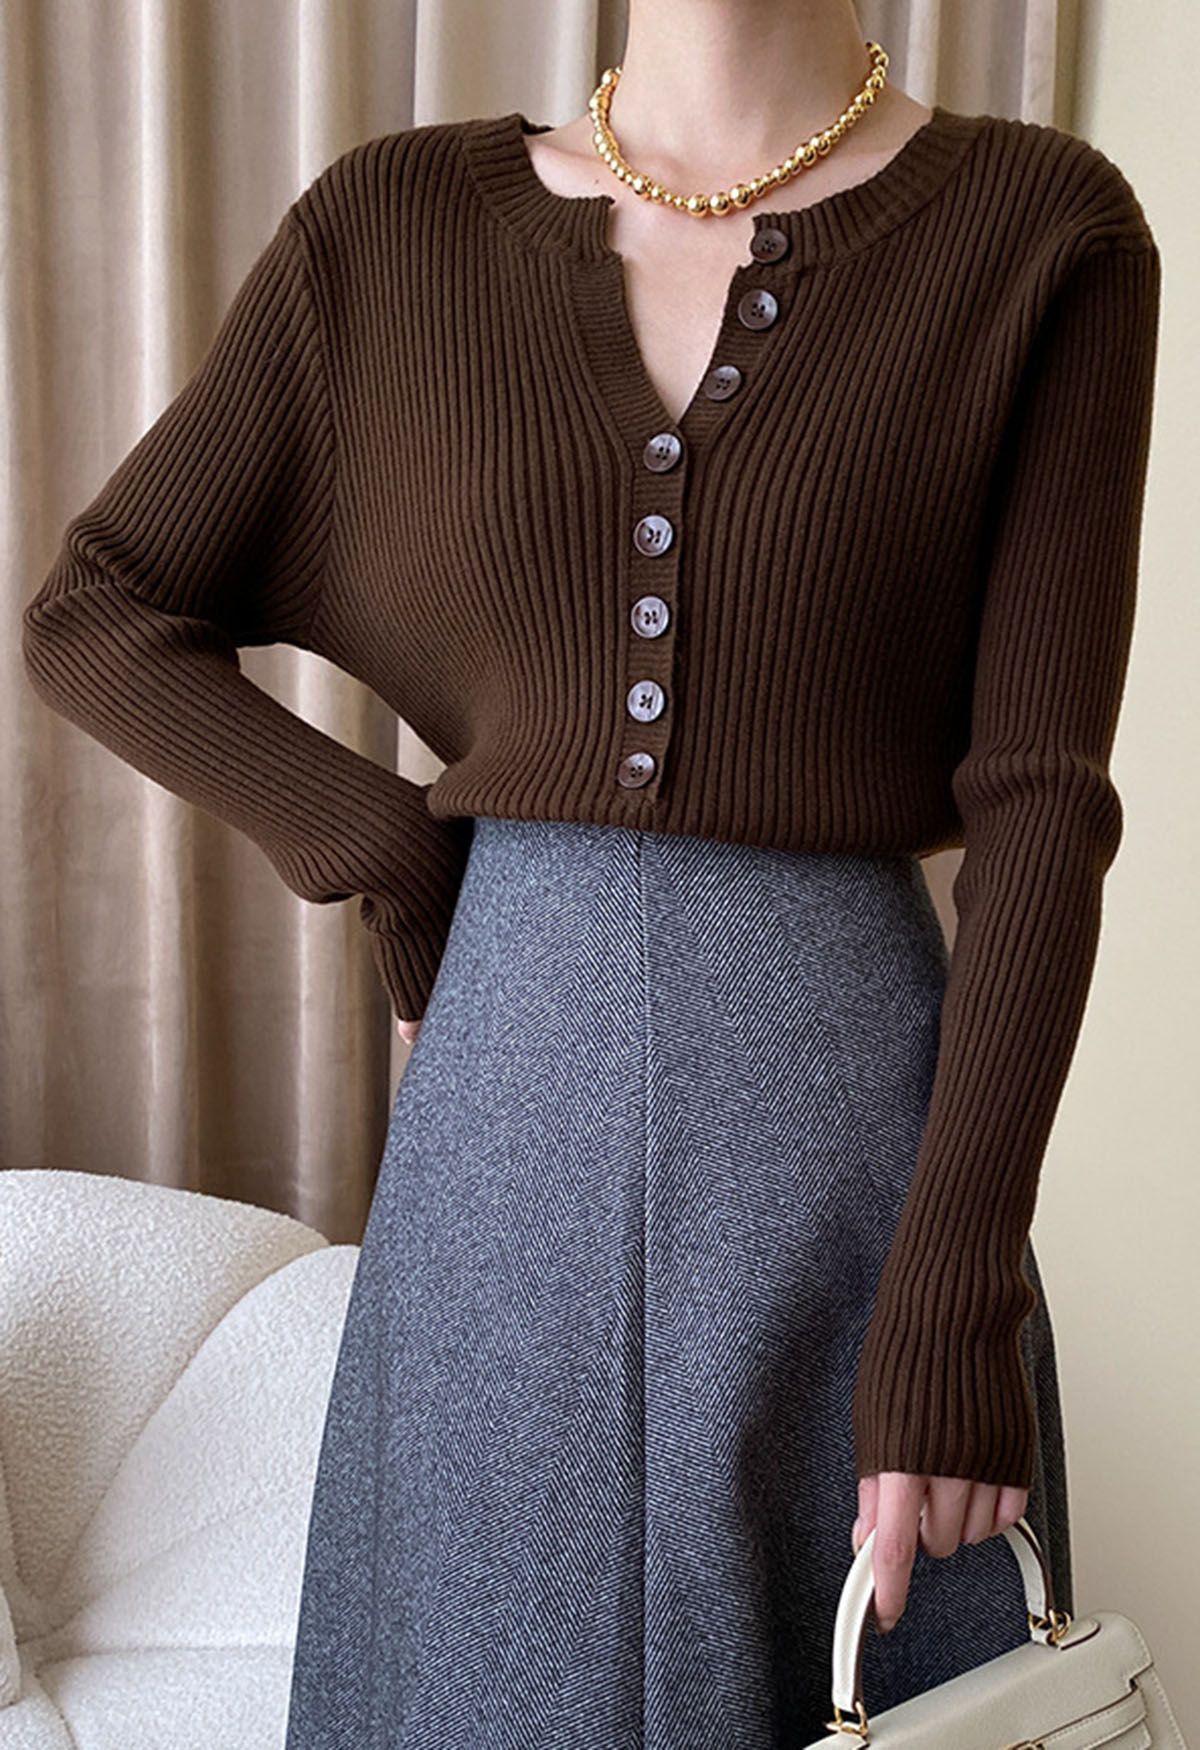 Versatile Button Front Ribbed Knit Top in Brown